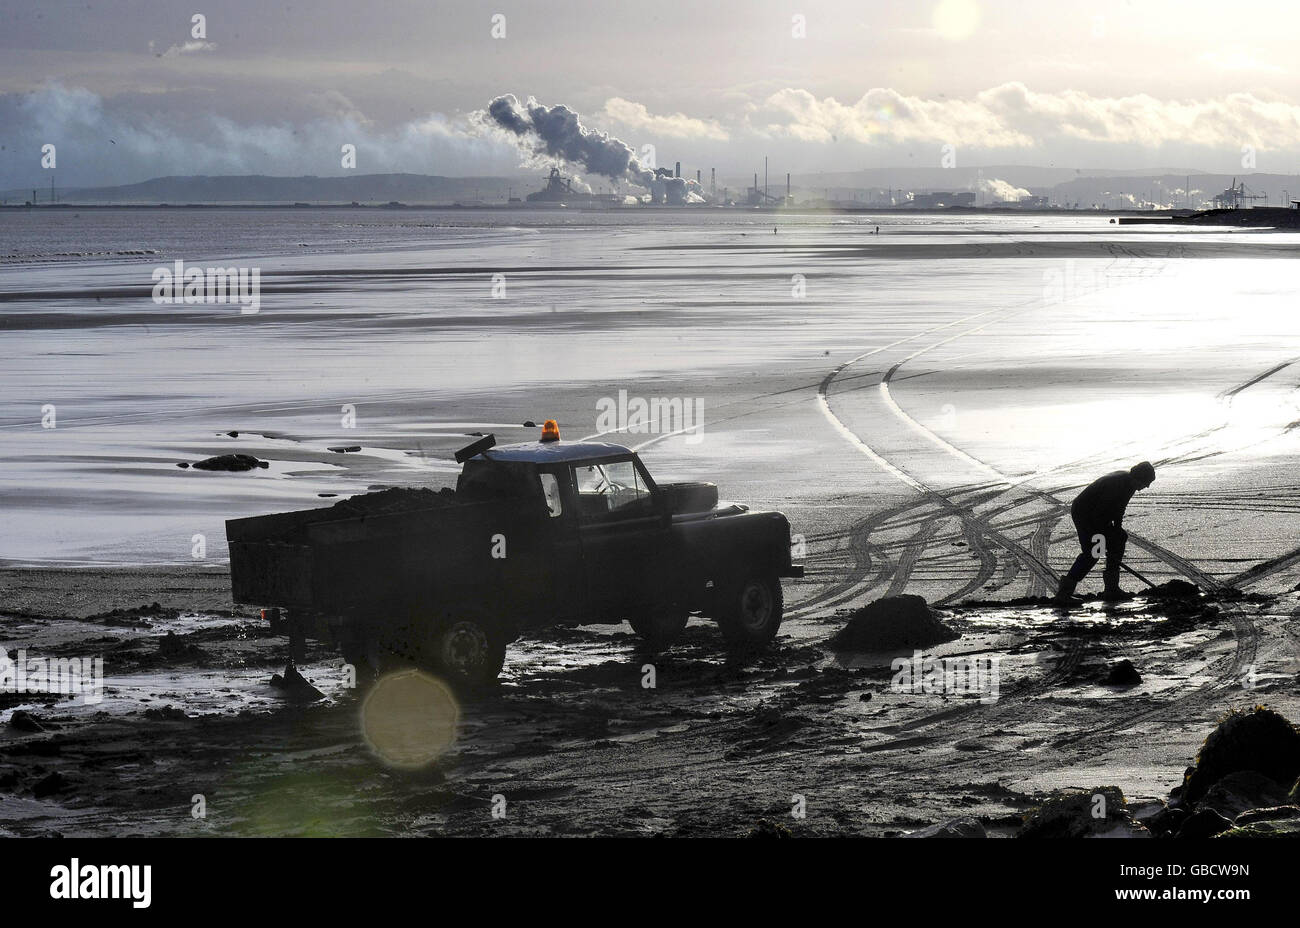 Sea coal is scraped from a beach in Hartlepool and loaded onto a truck. Several tons of coal is dumped on the beaches from seams out at sea and provides income for those prepared to brave the elements. Stock Photo